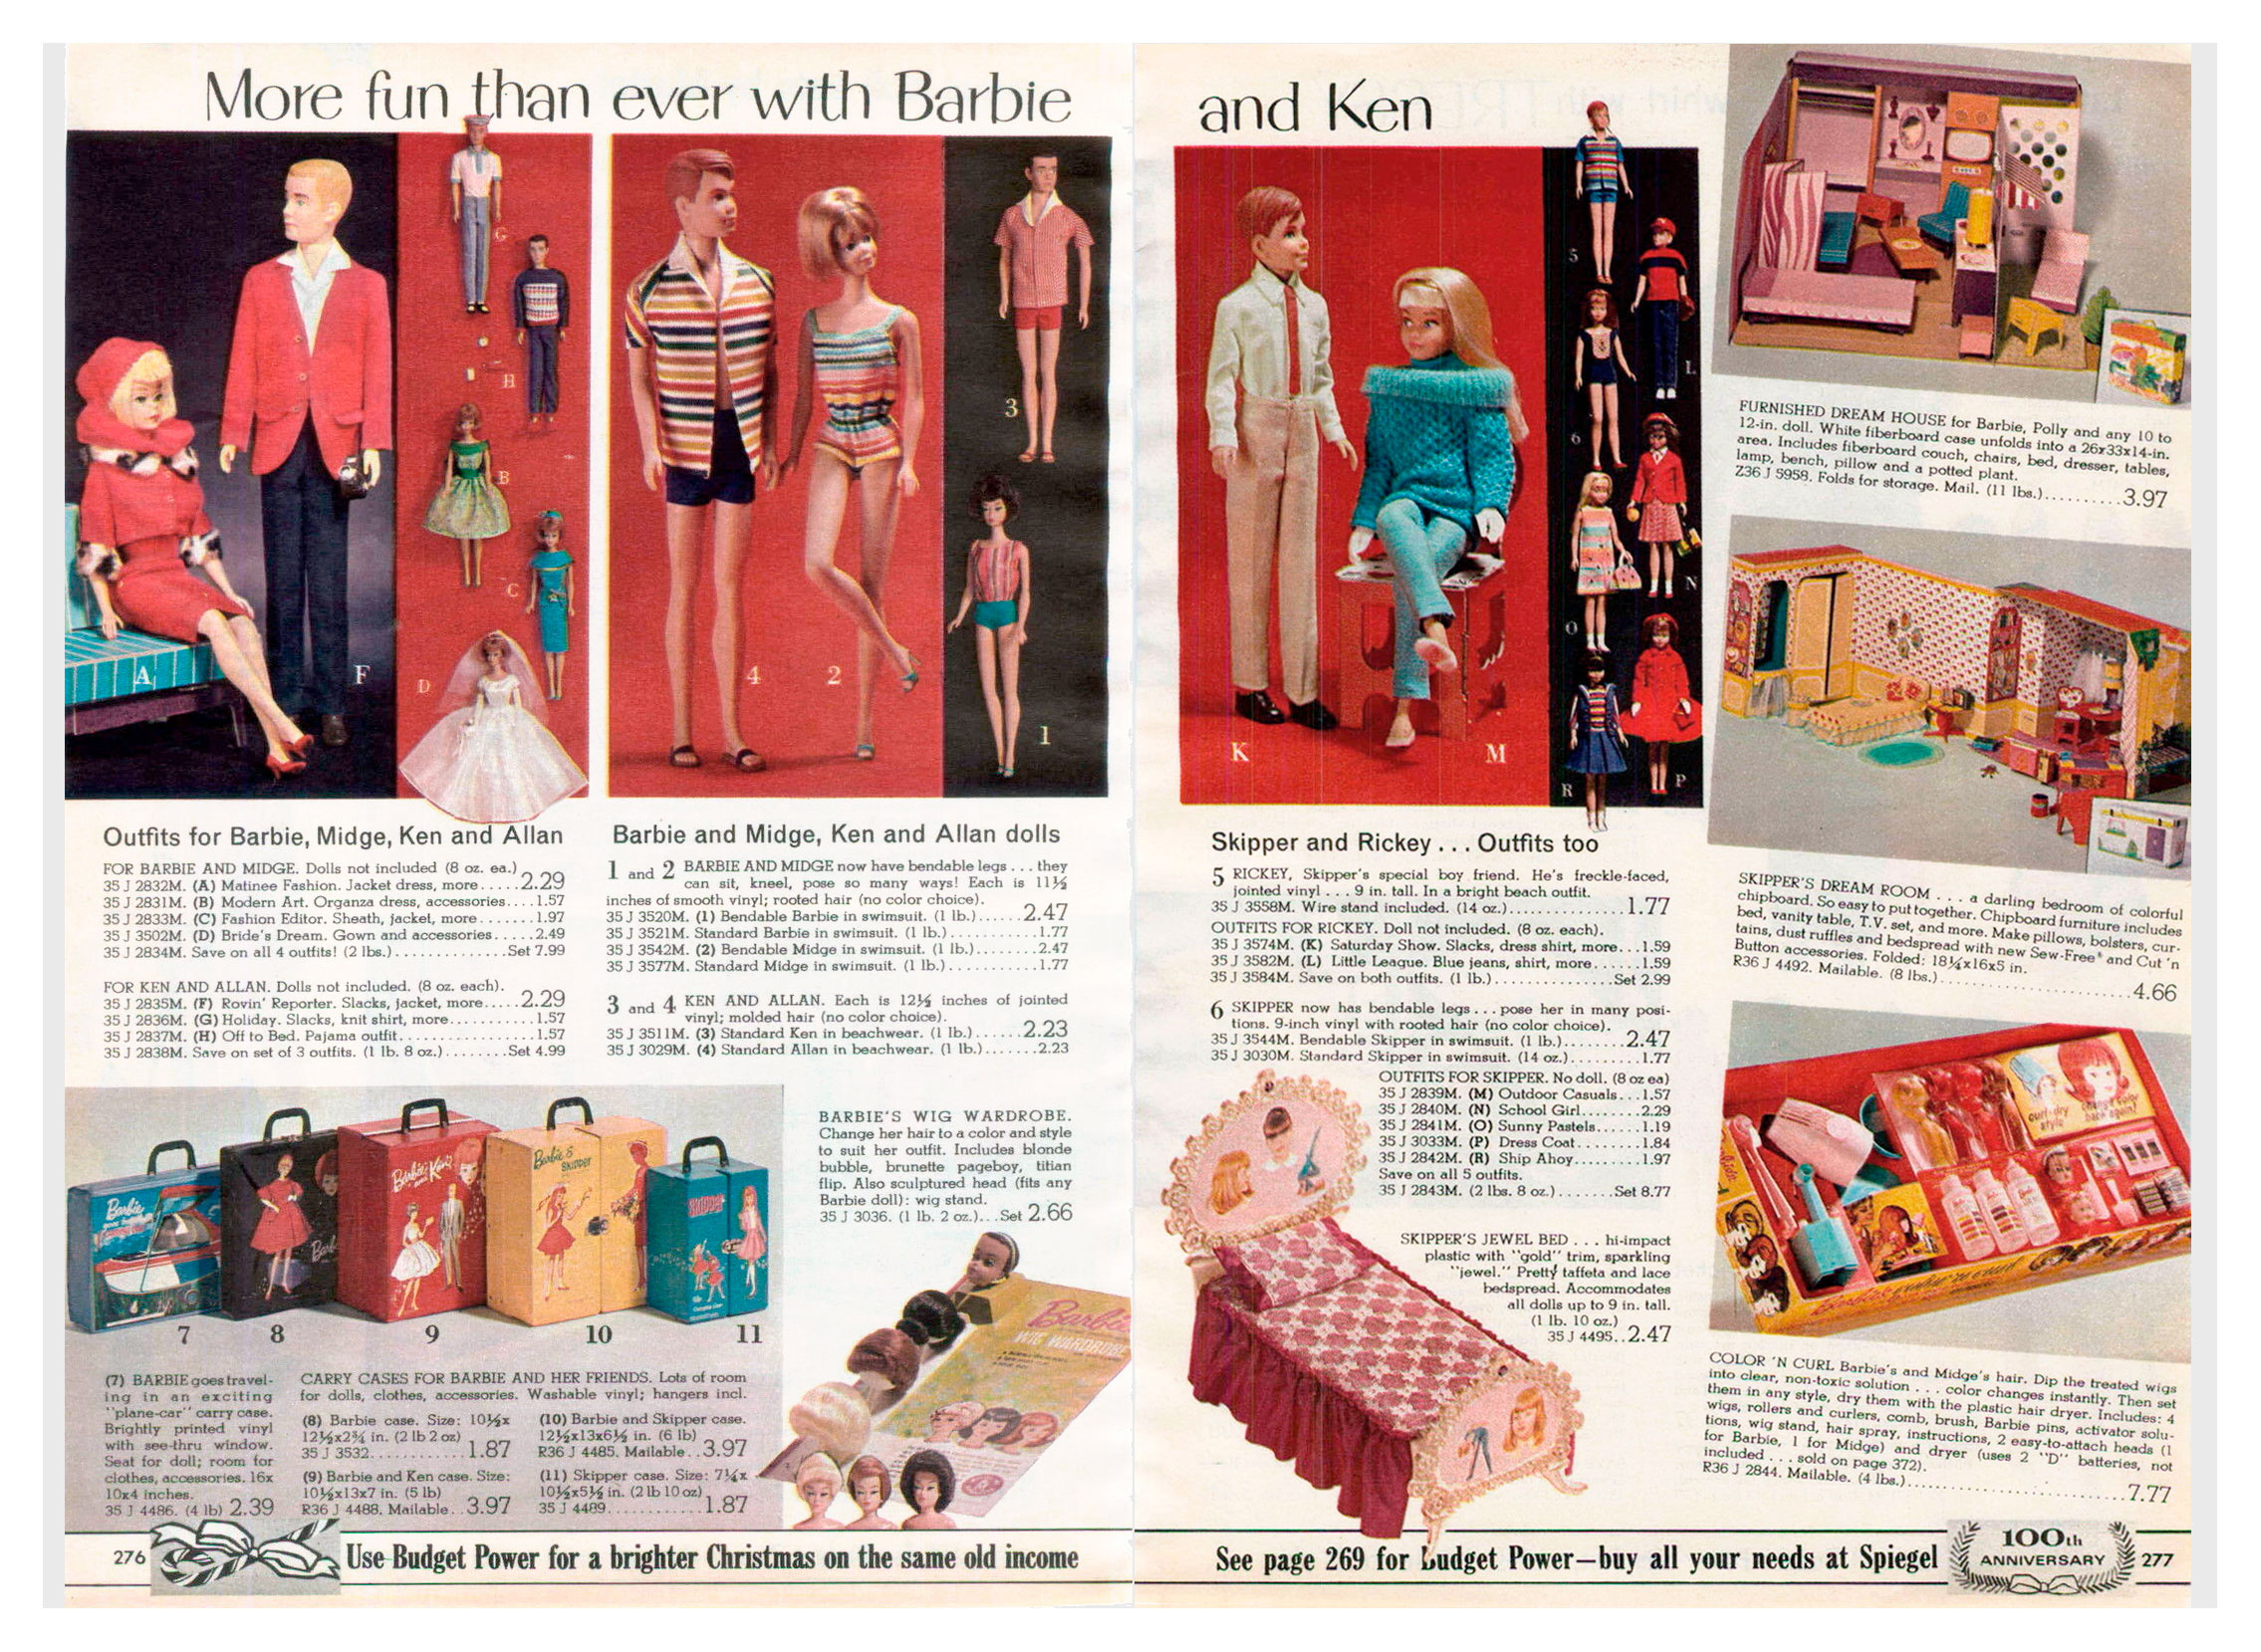 From 1965 Spiegel Christmas catalogue